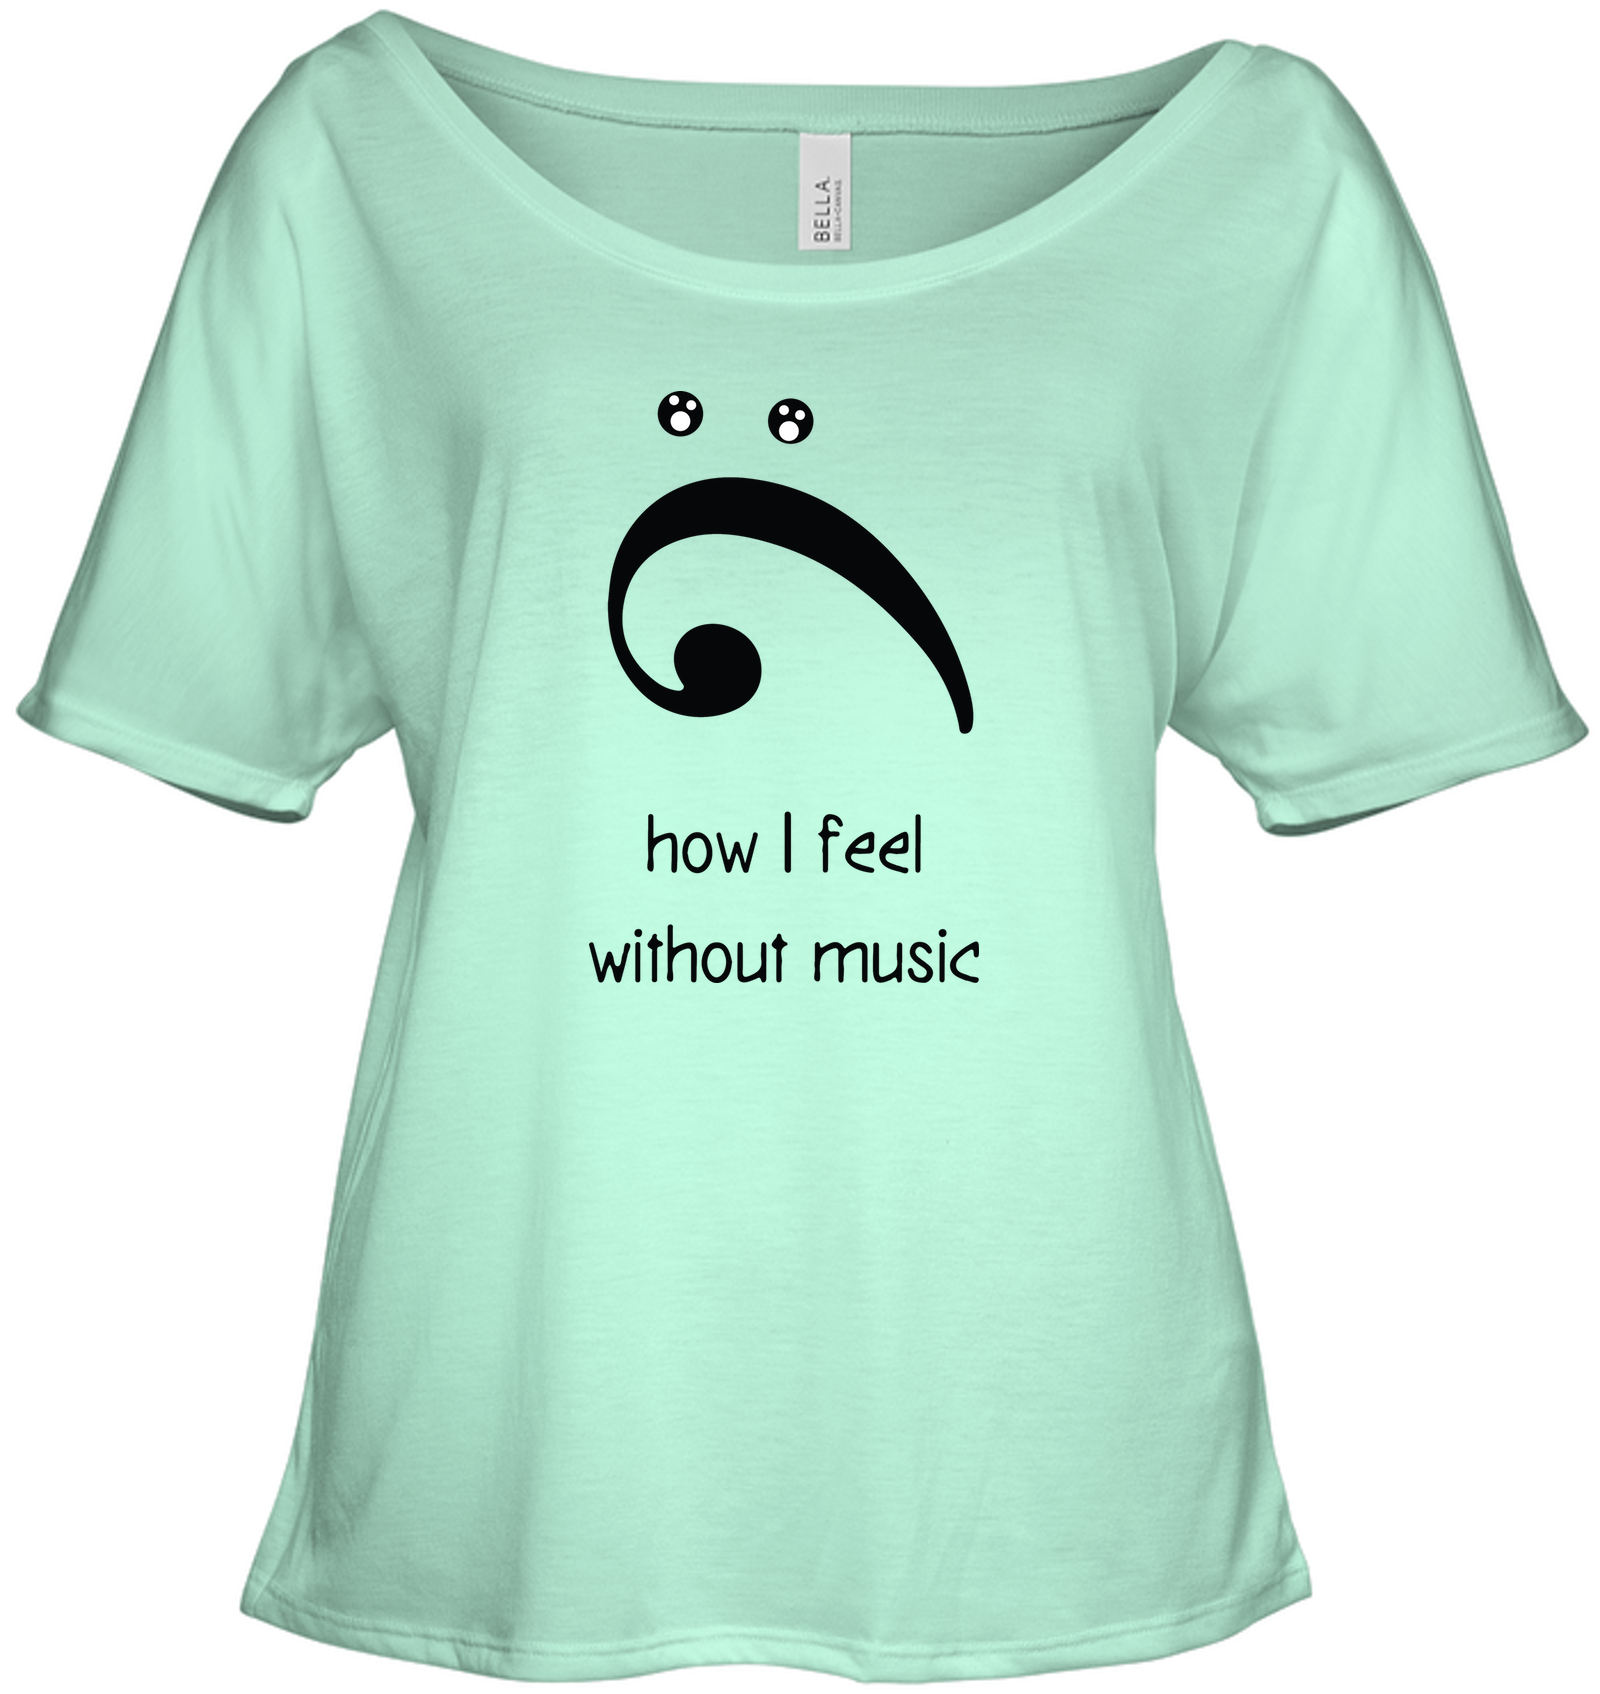 How I Feel Without Music - Bella + Canvas Women's Slouchy Tee